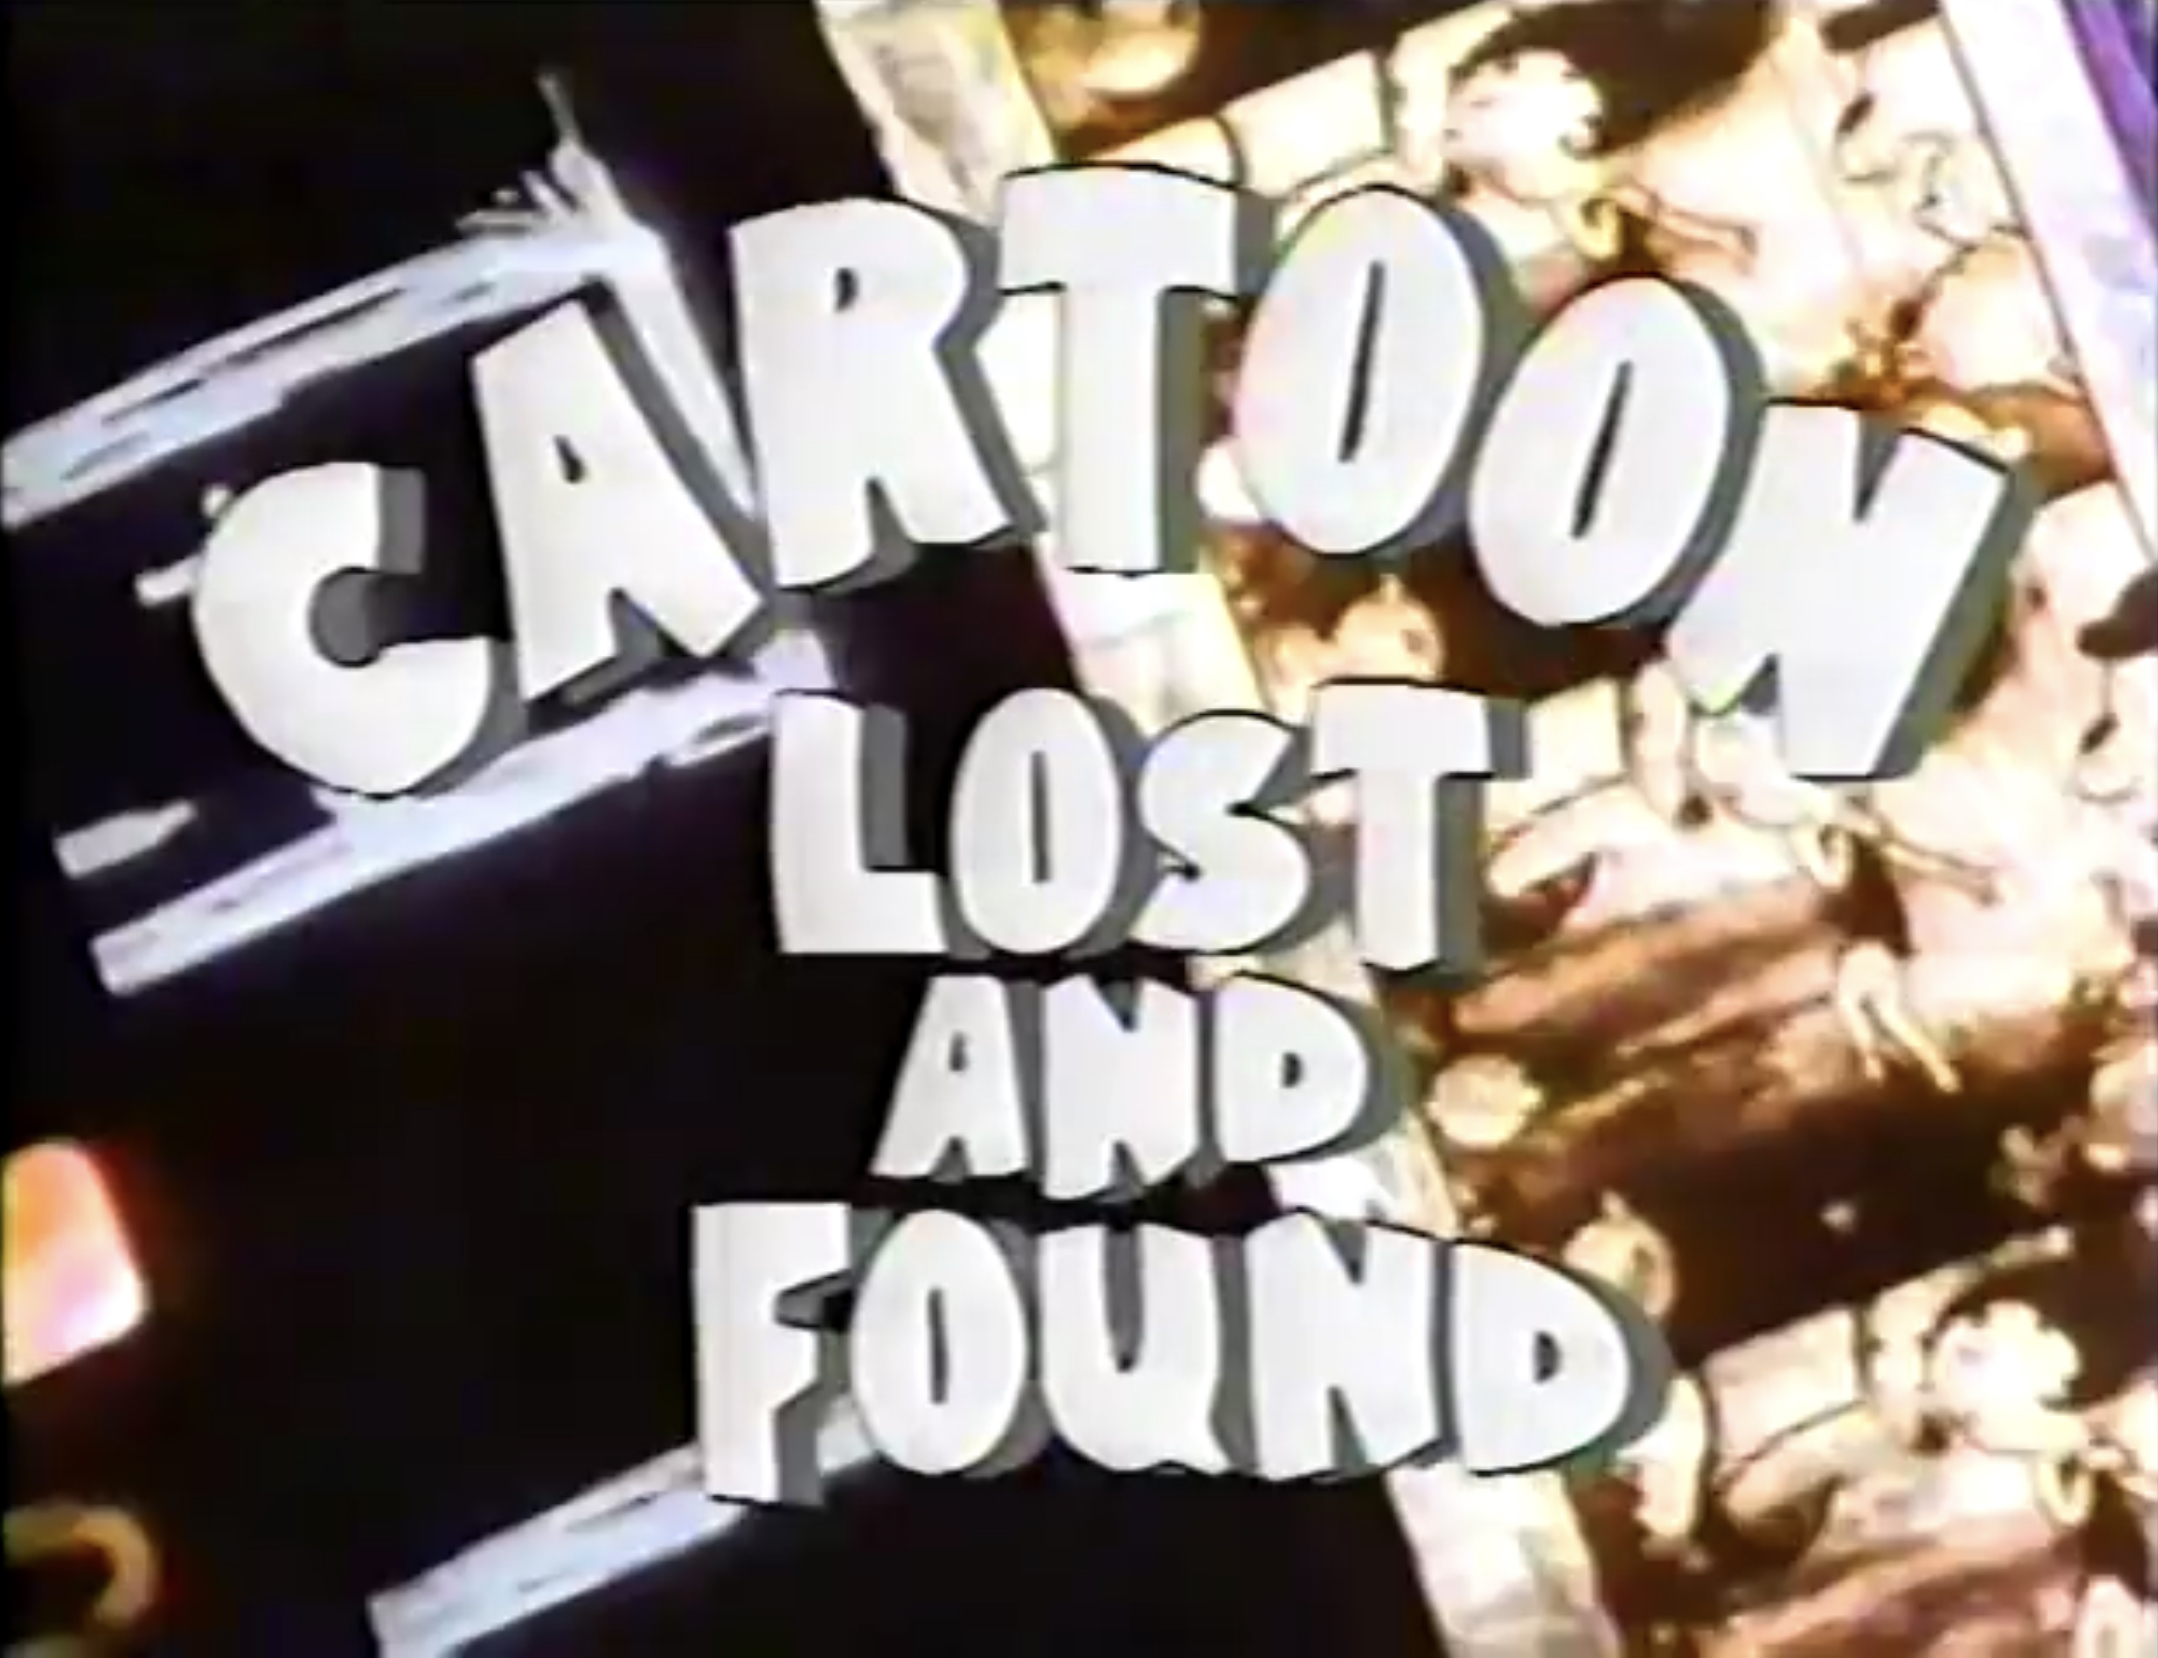 Cartoon Lost And Found - Cartoon Lost and Found (found live-action/animated Nick at Nite special; 1990)